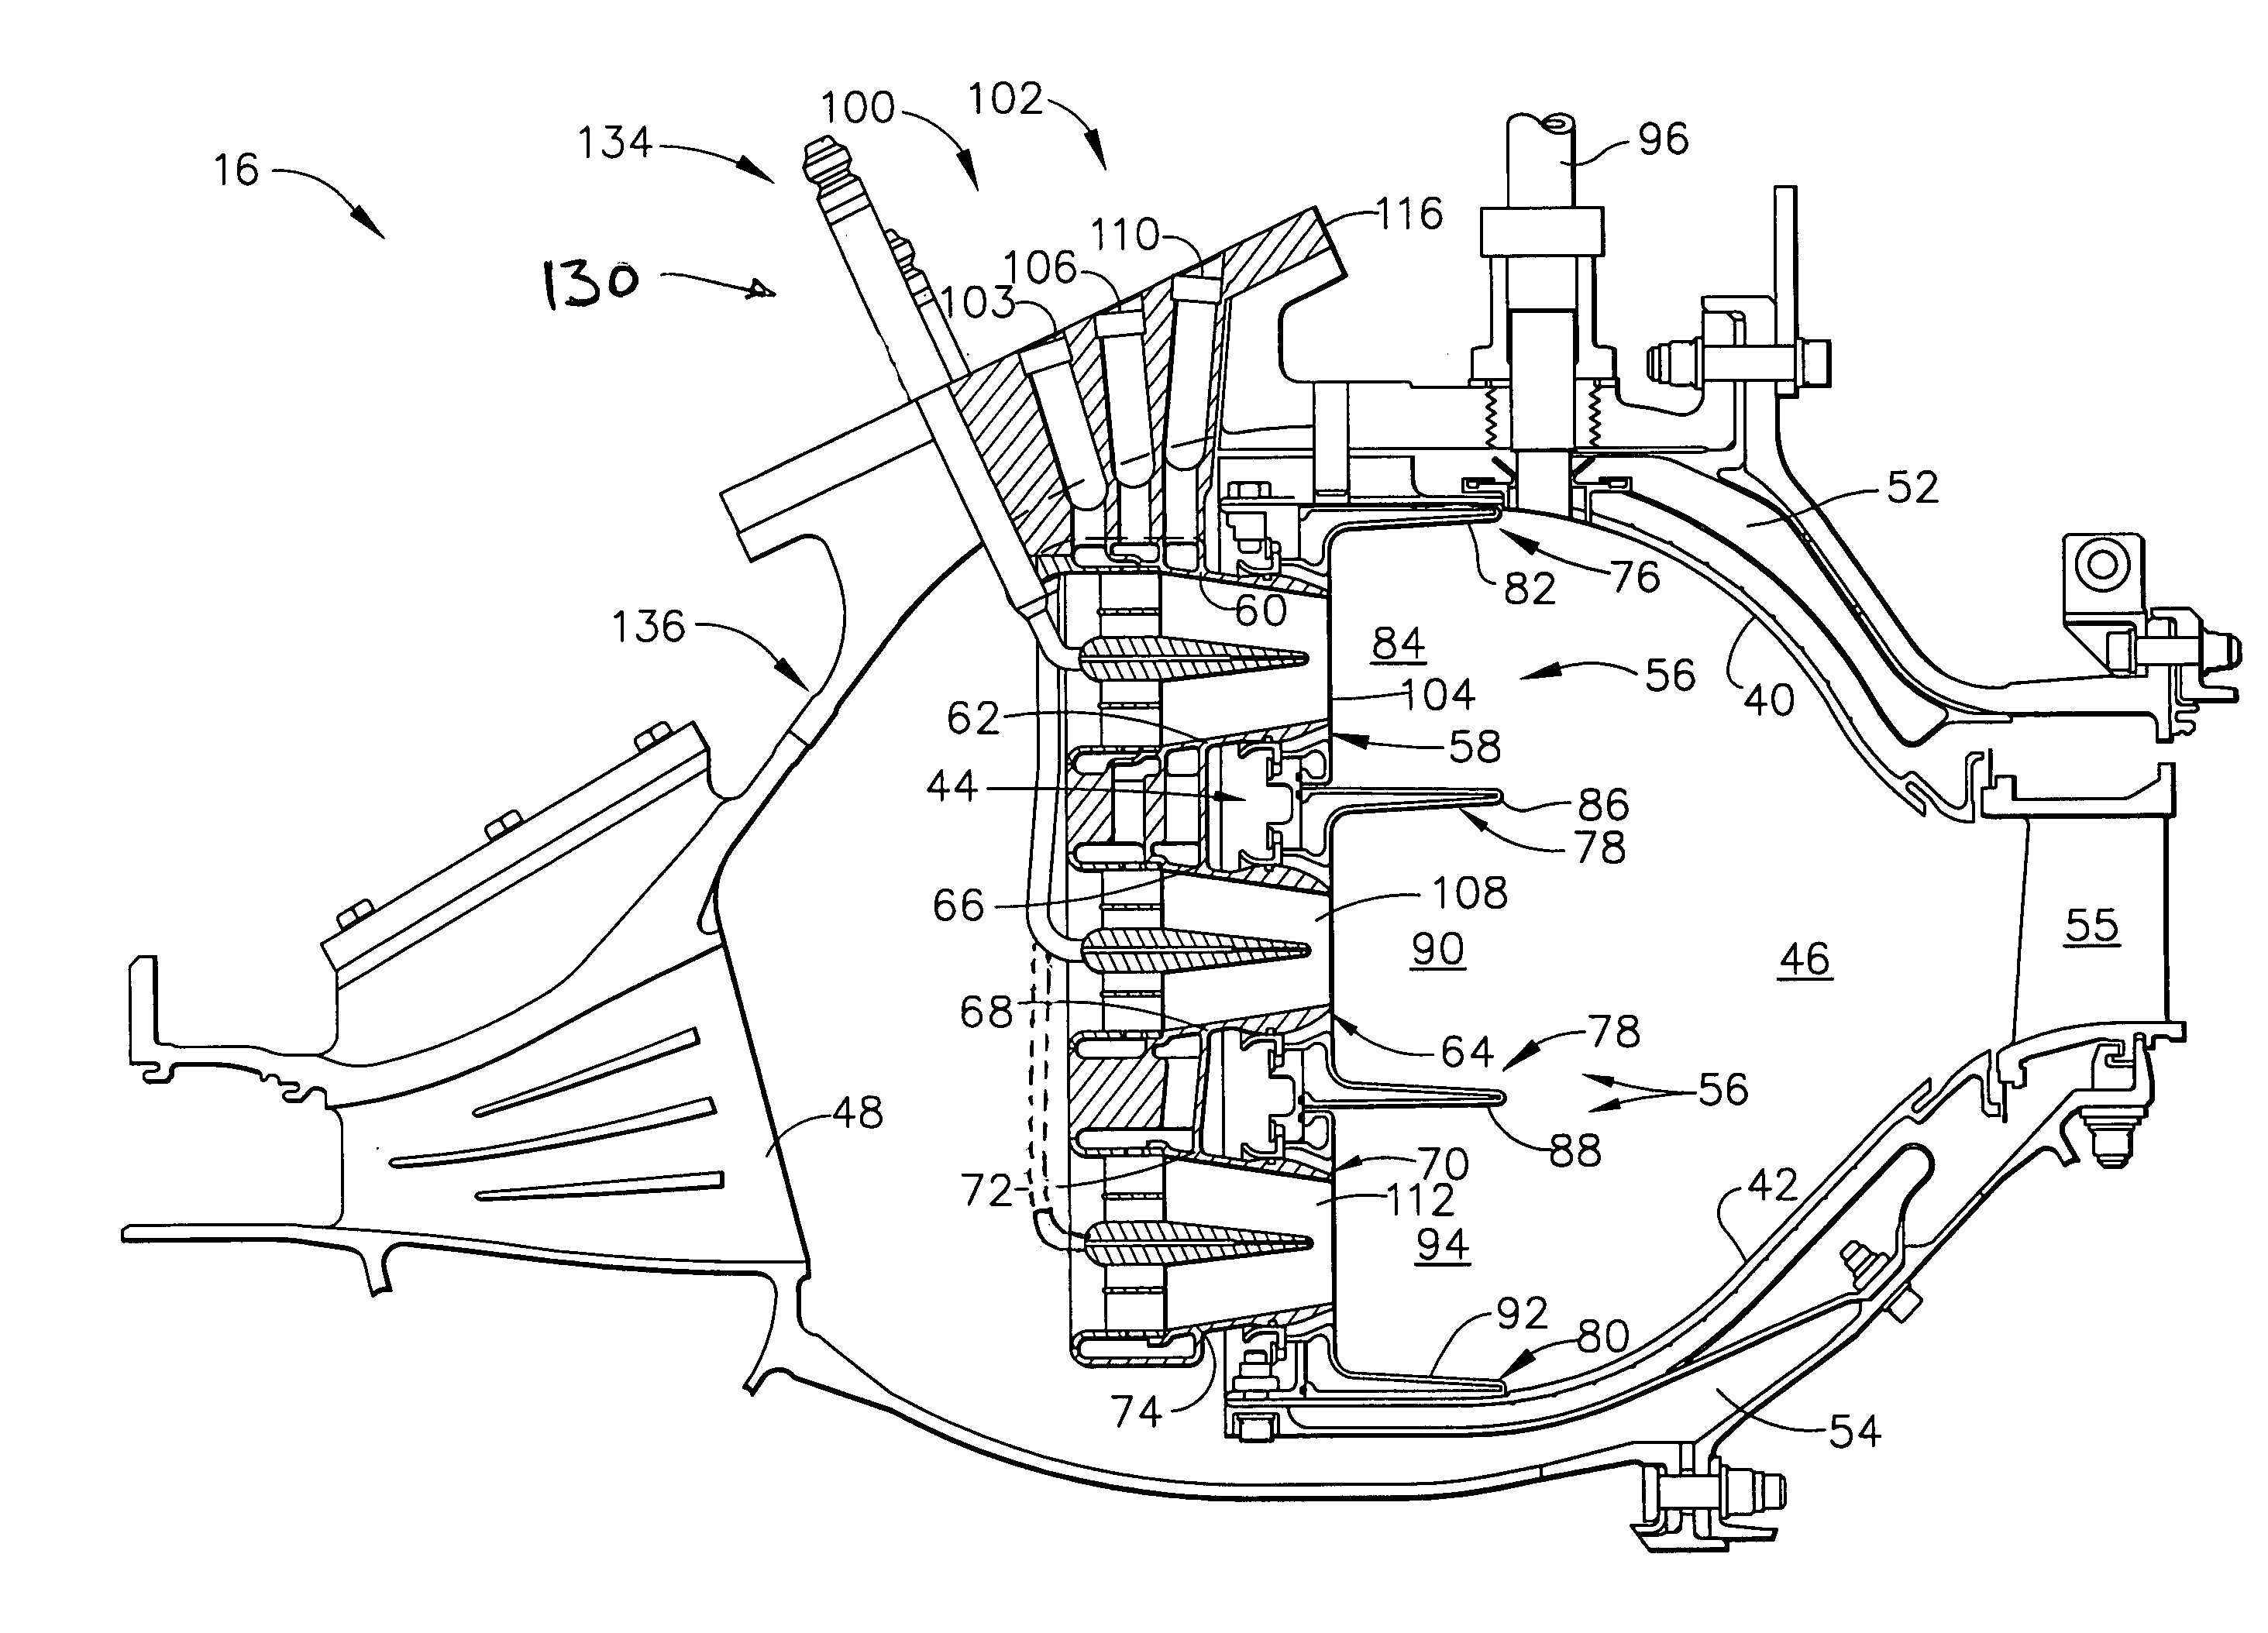 Methods and apparatus for reducing gas turbine engine emissions